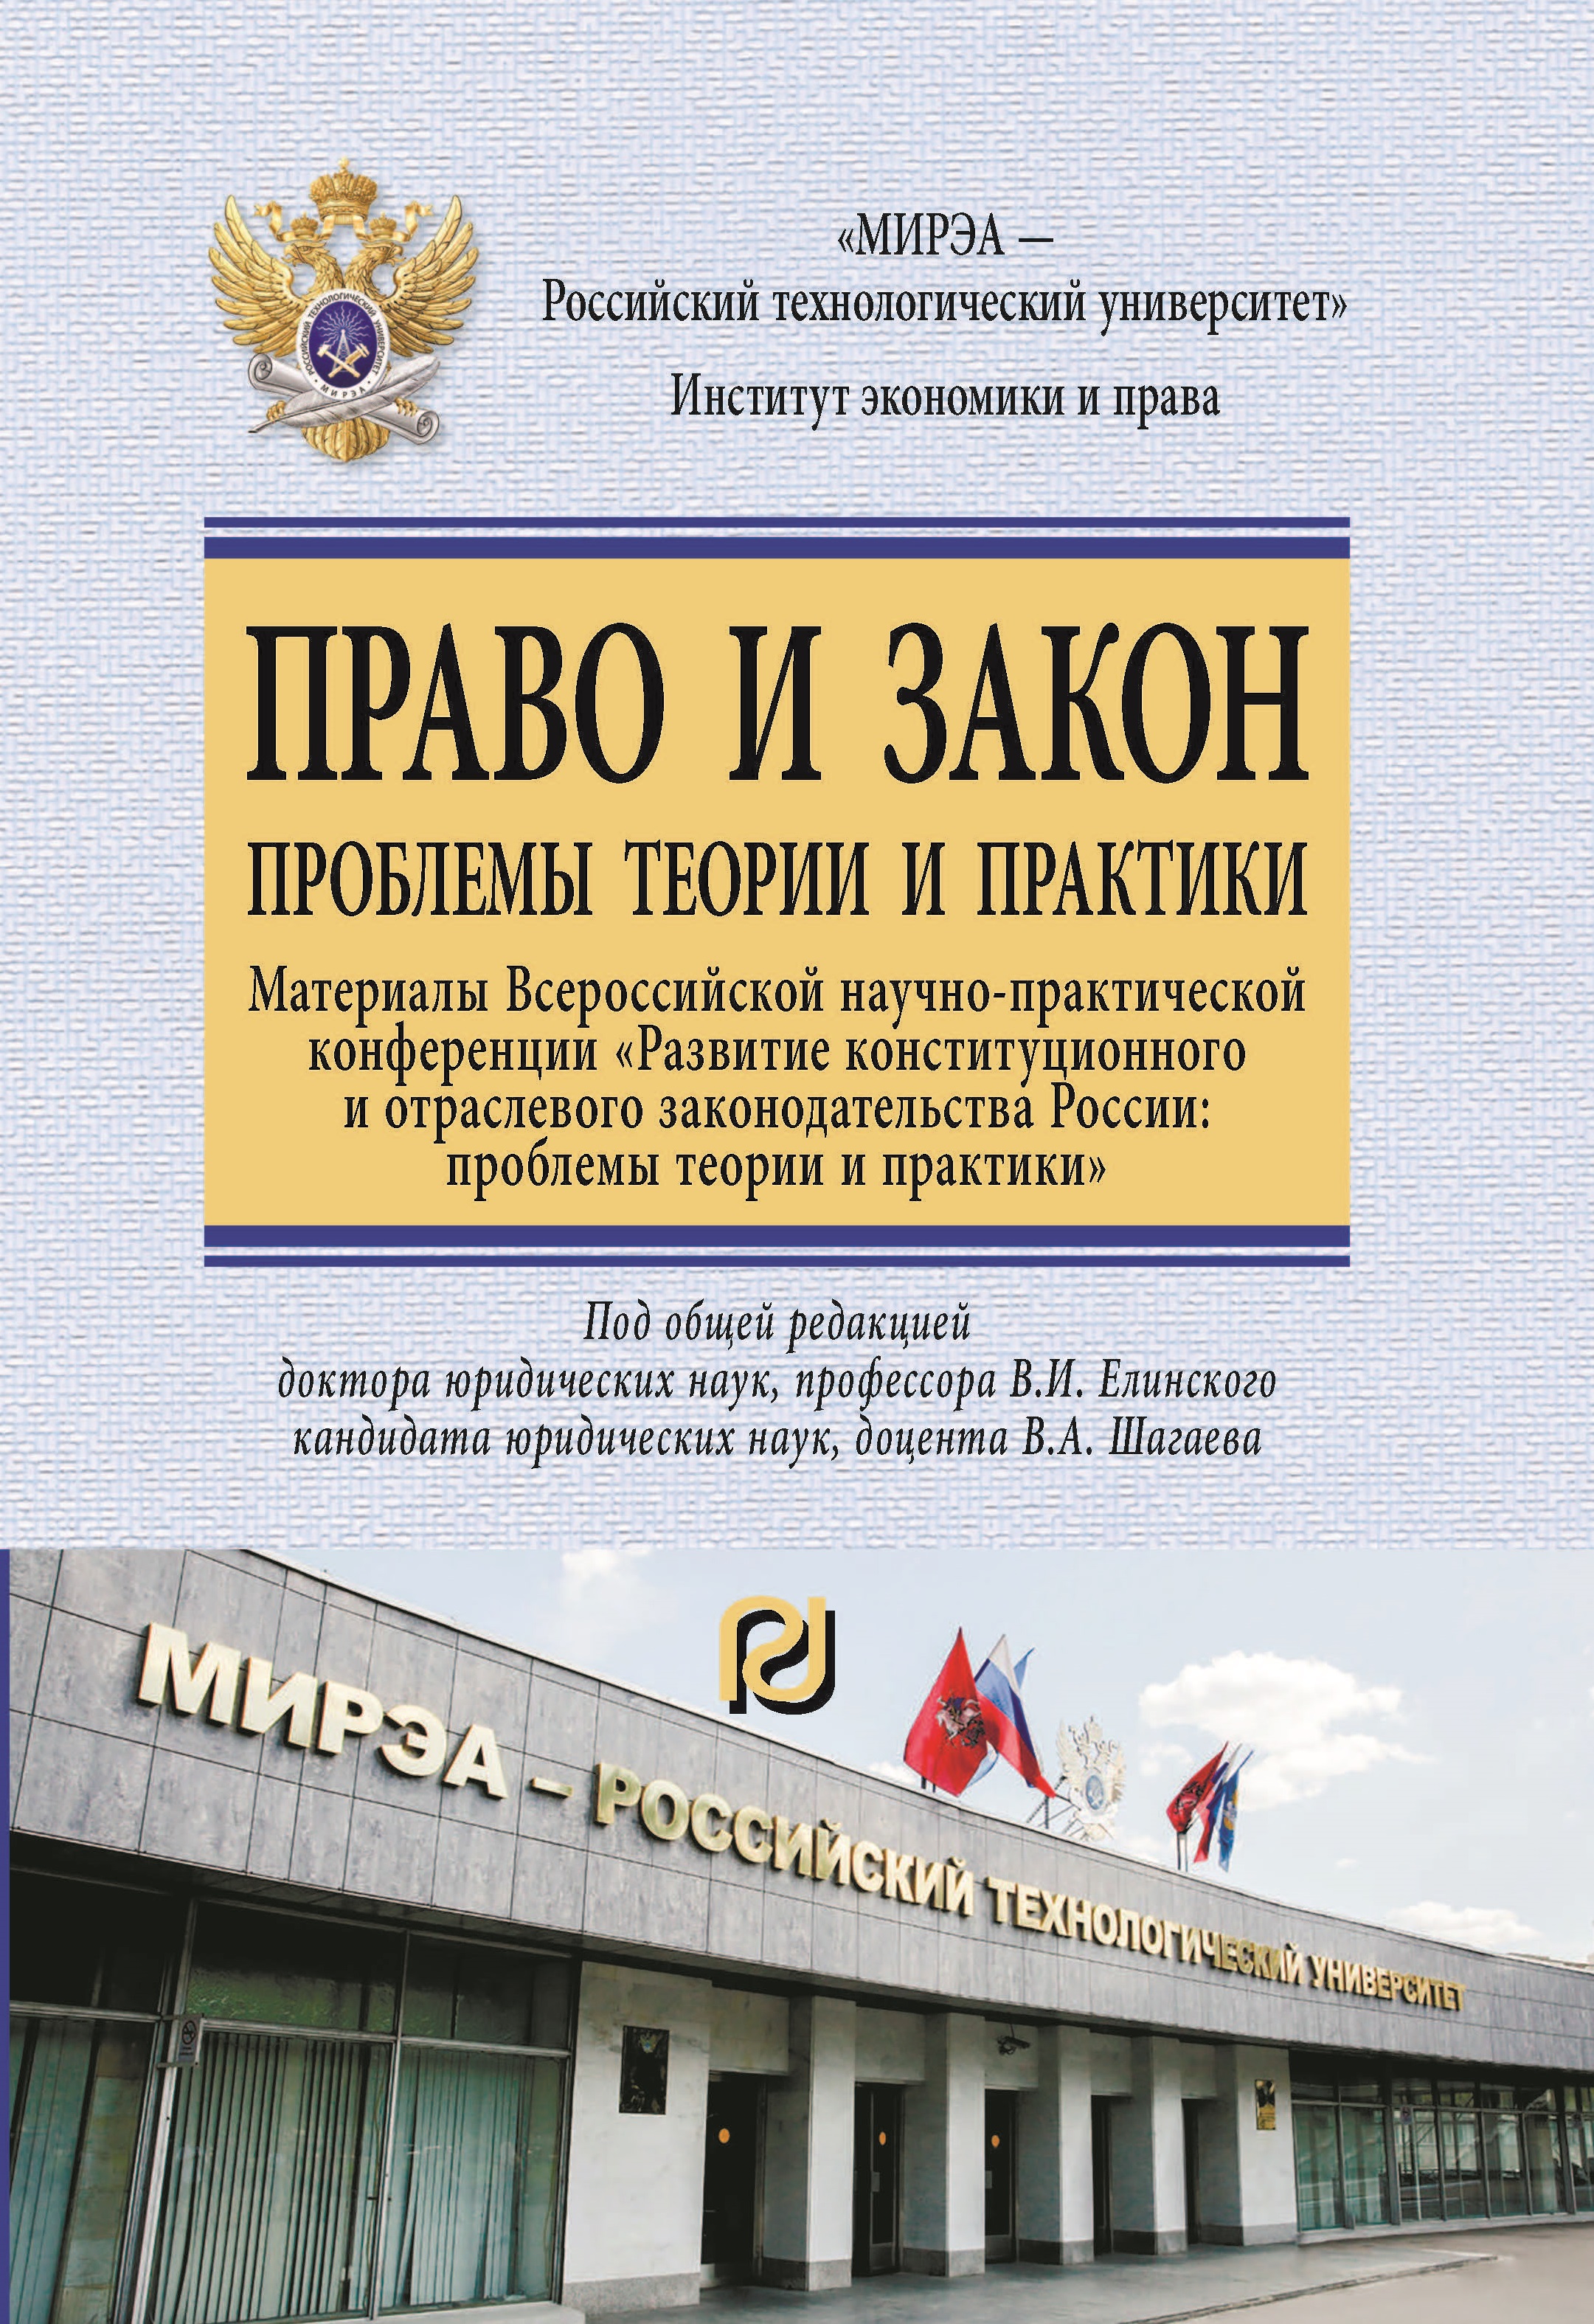                         PROSPECTS FOR IMPROVING THE FOUNDATIONS OF THE RUSSIAN CONSTITUTIONAL SYSTEM
            